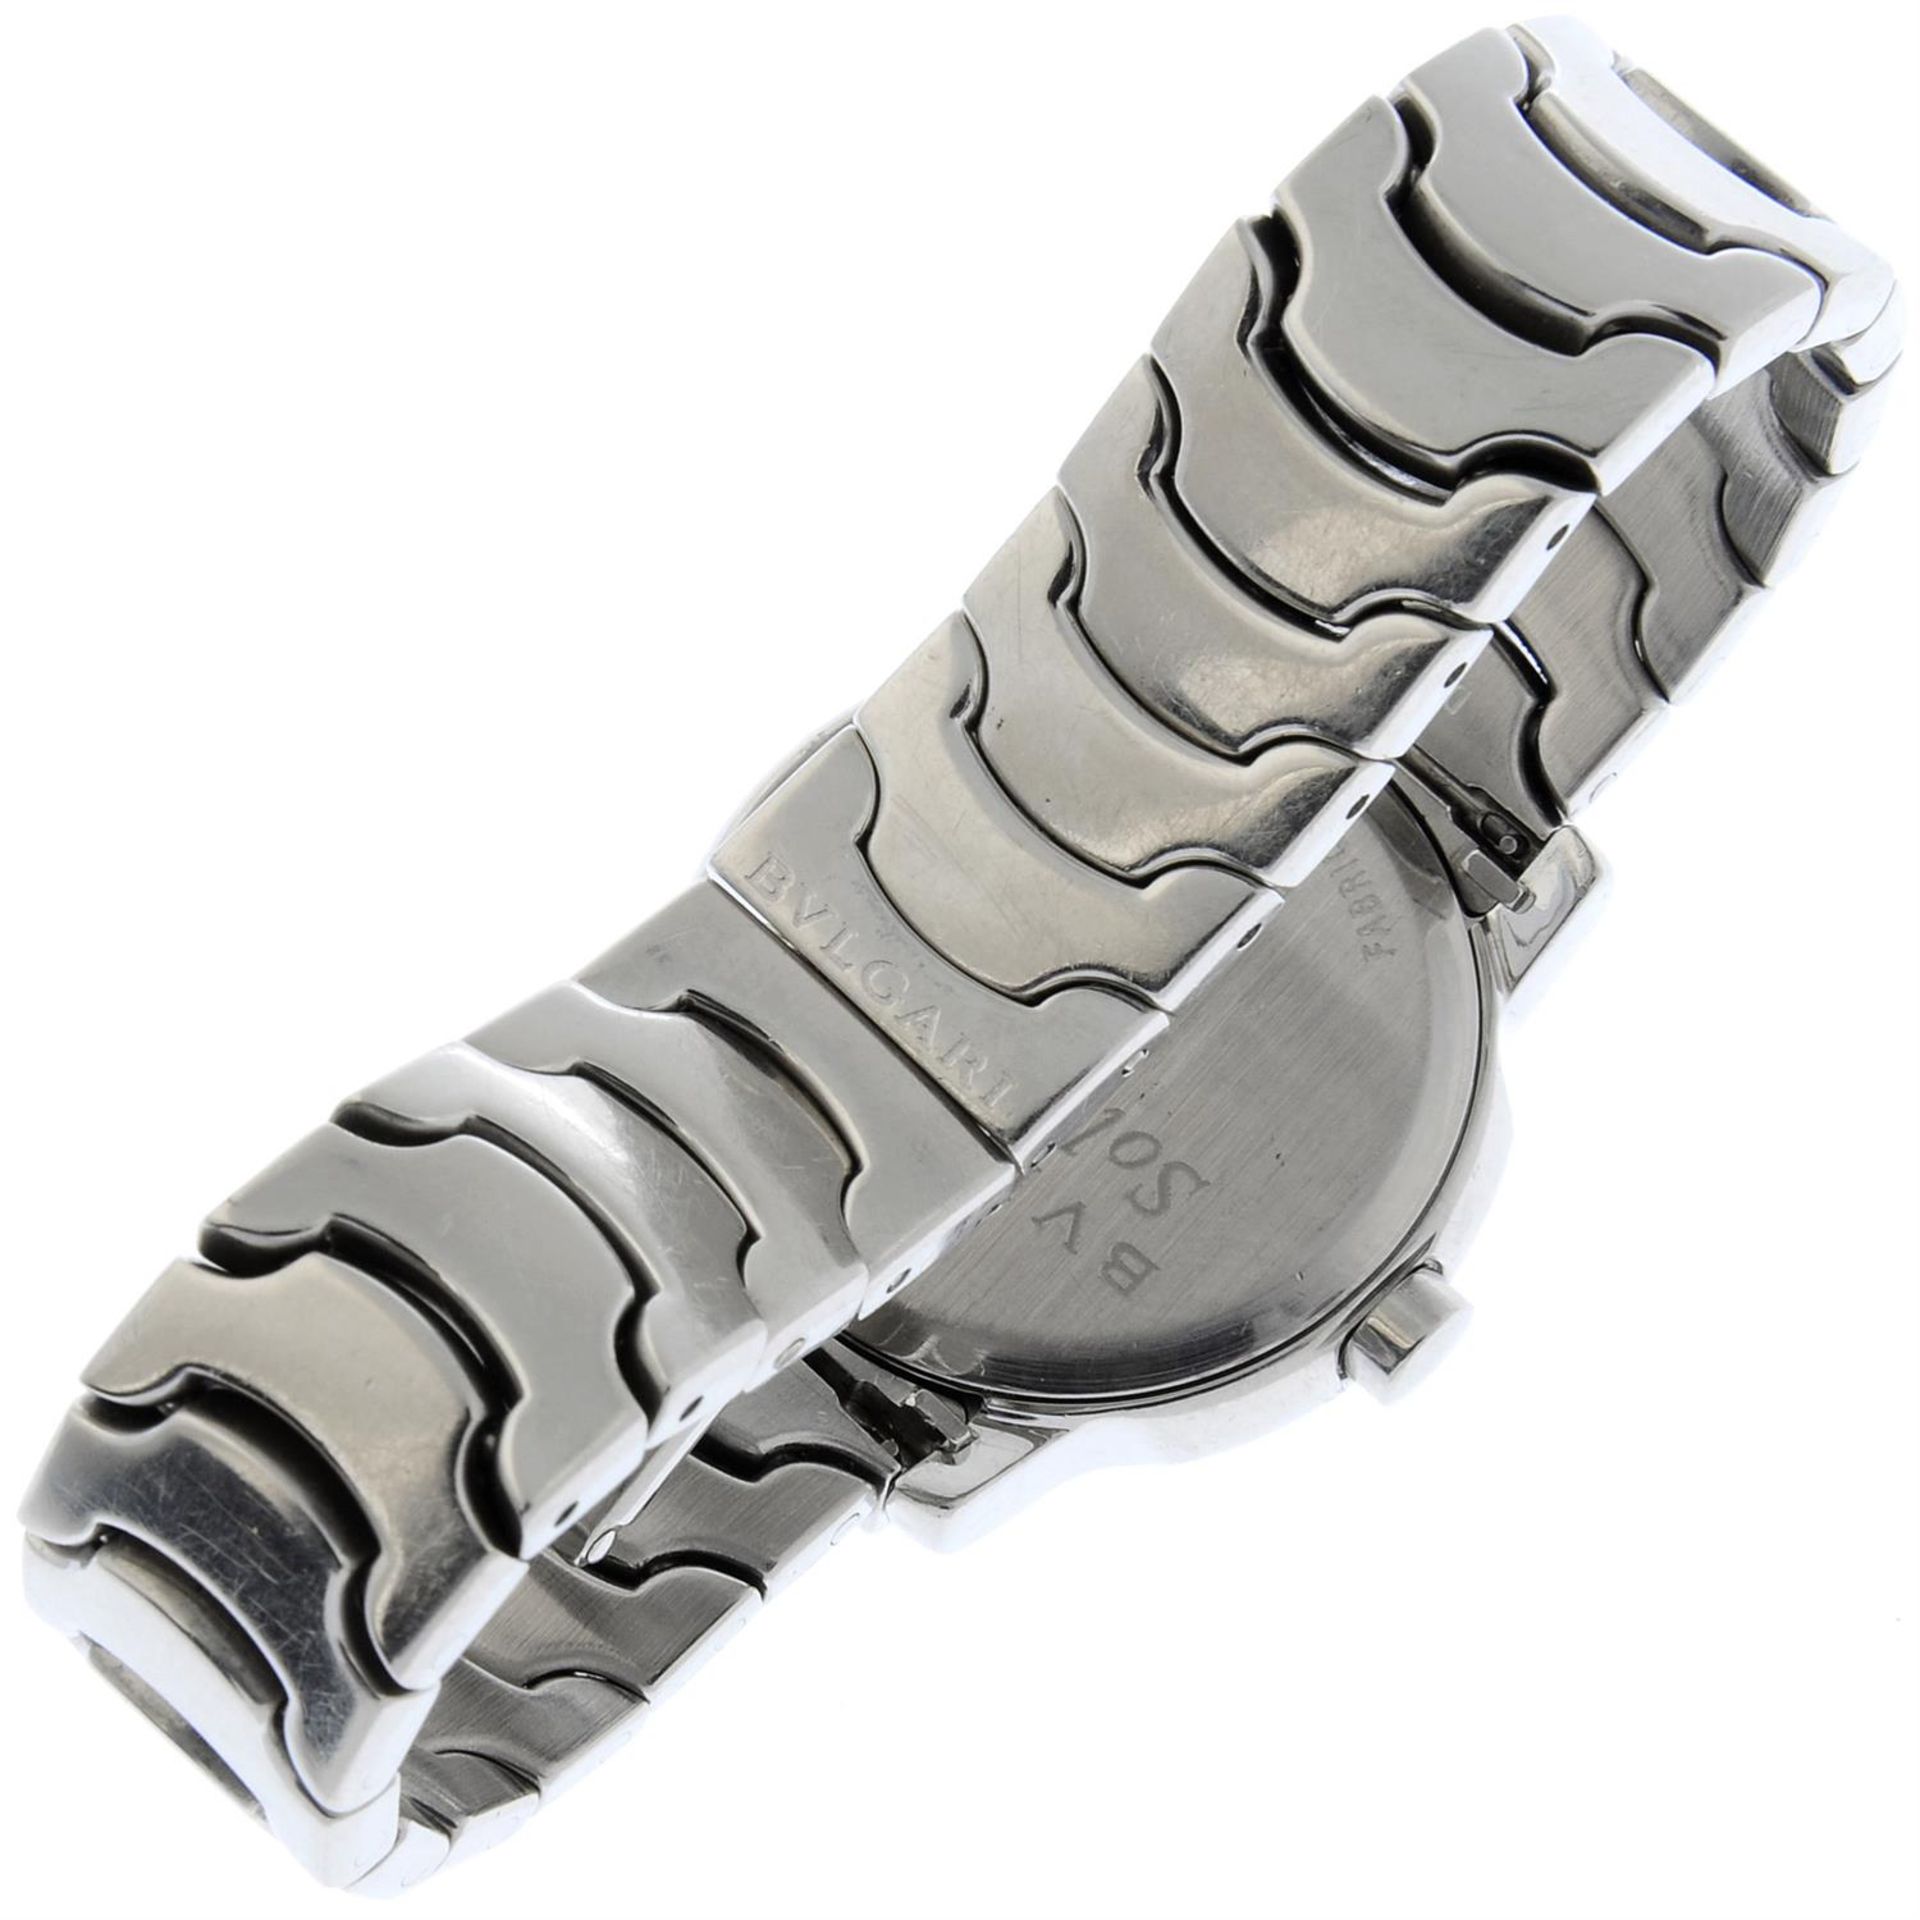 BULGARI - a stainless steel Solotempo bracelet watch, 29mm. - Image 2 of 4